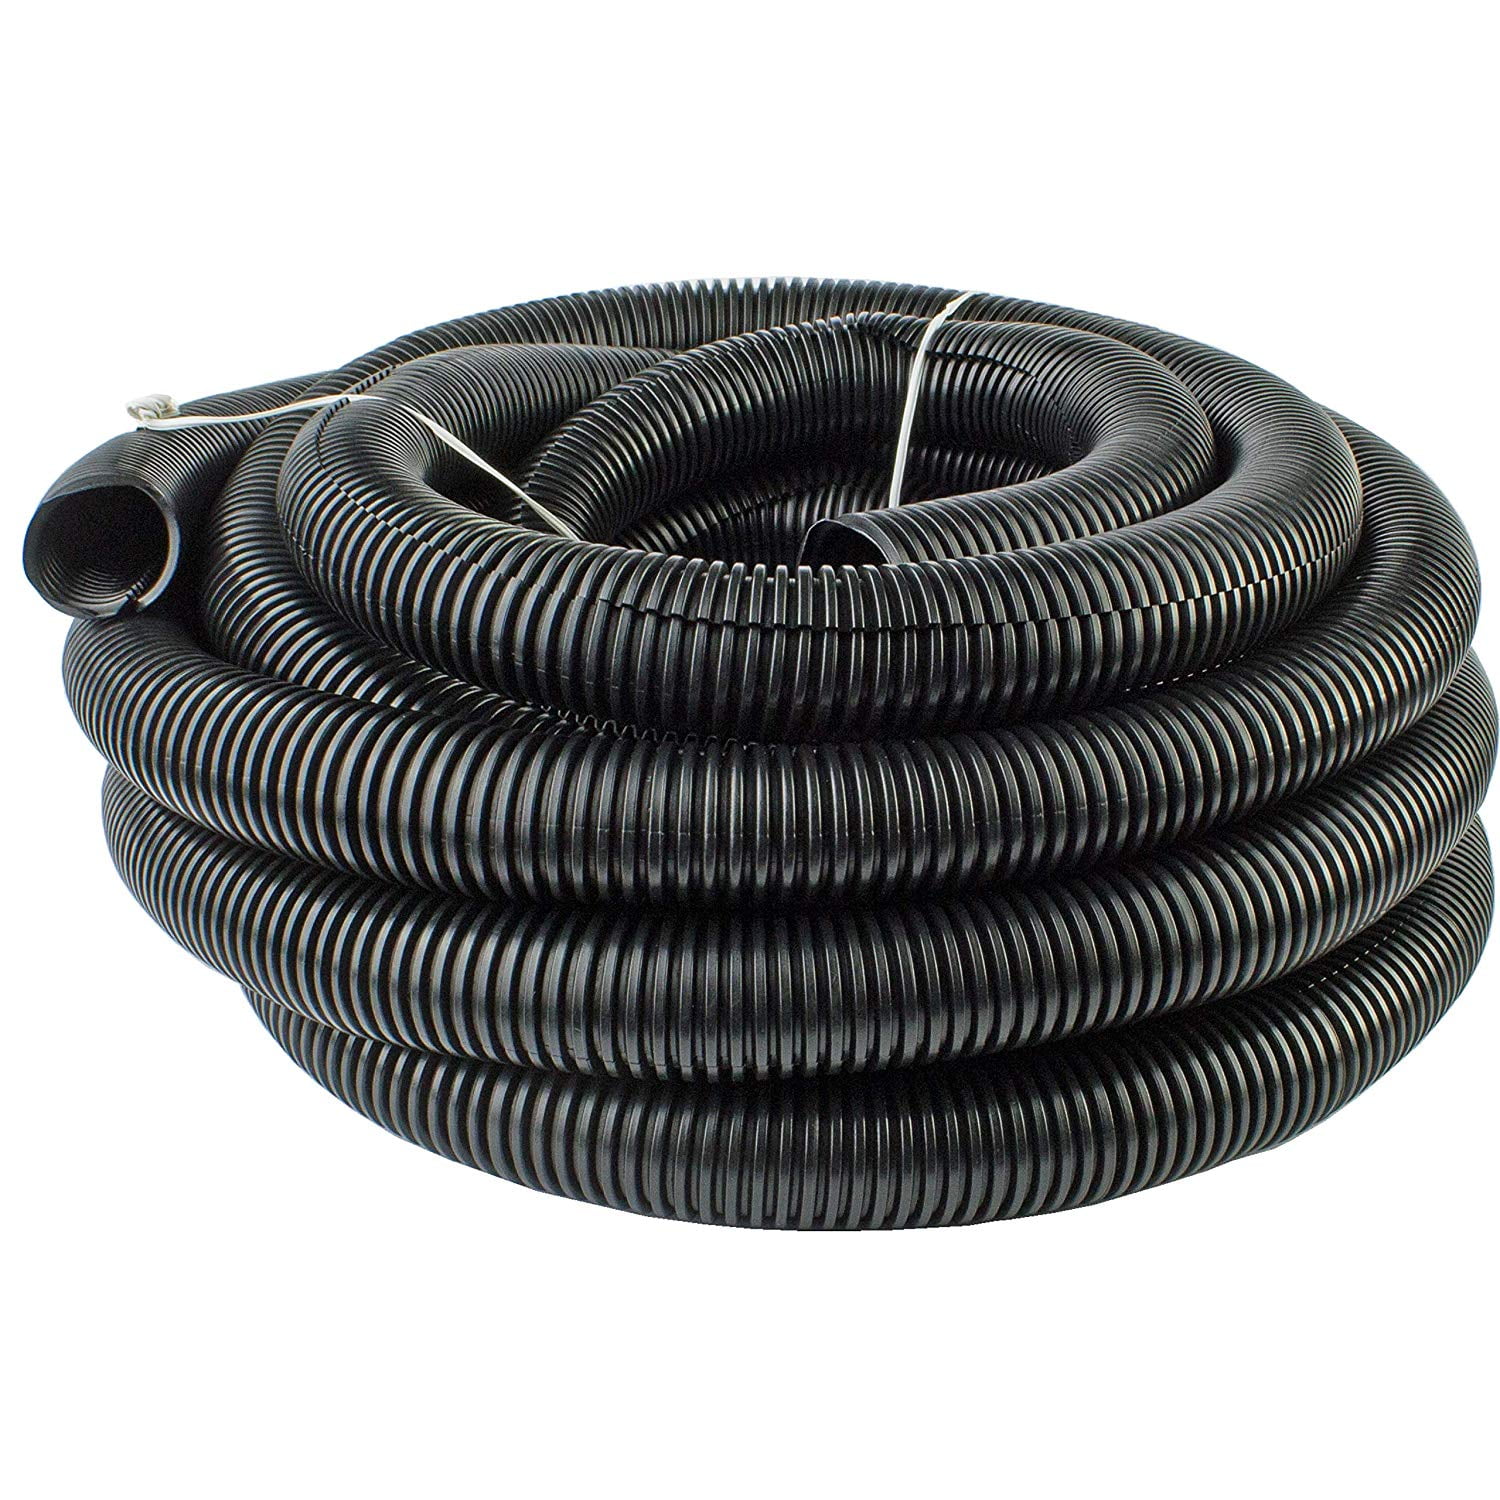 2M Cable Conduit Cable Spiral Protection Hose 8-25mm Spiral Band Cable Bundle 